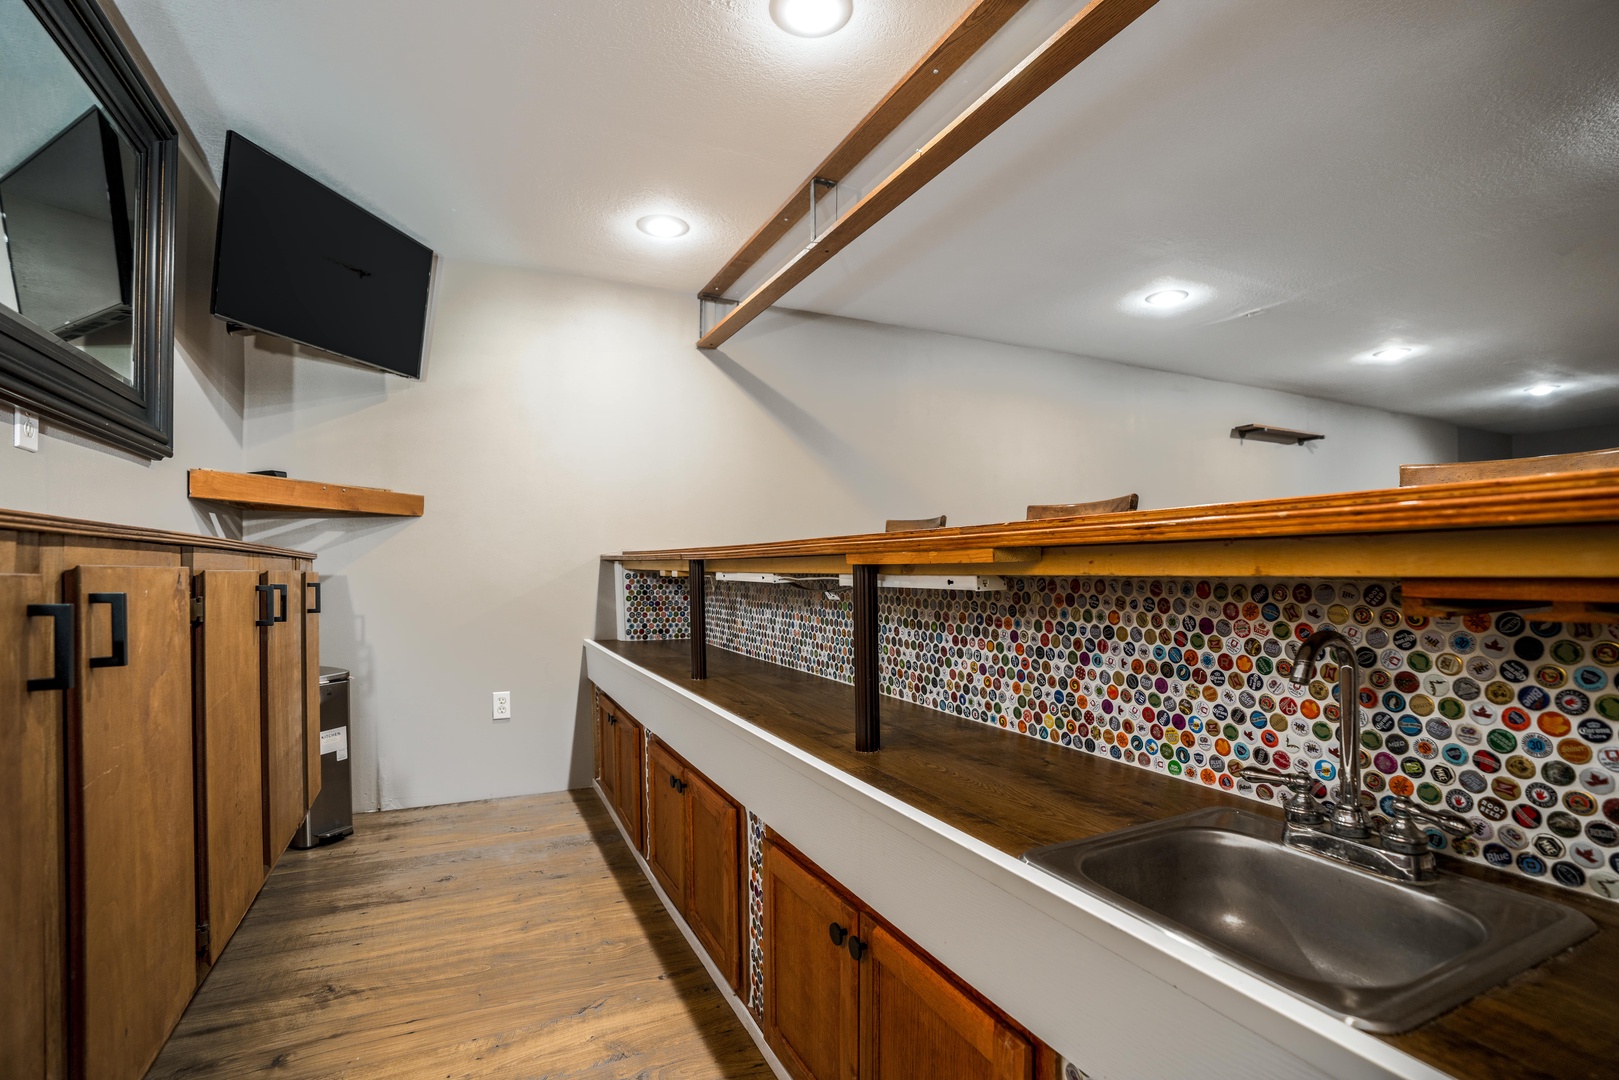 Mix up your favorite cocktail in the basement bar